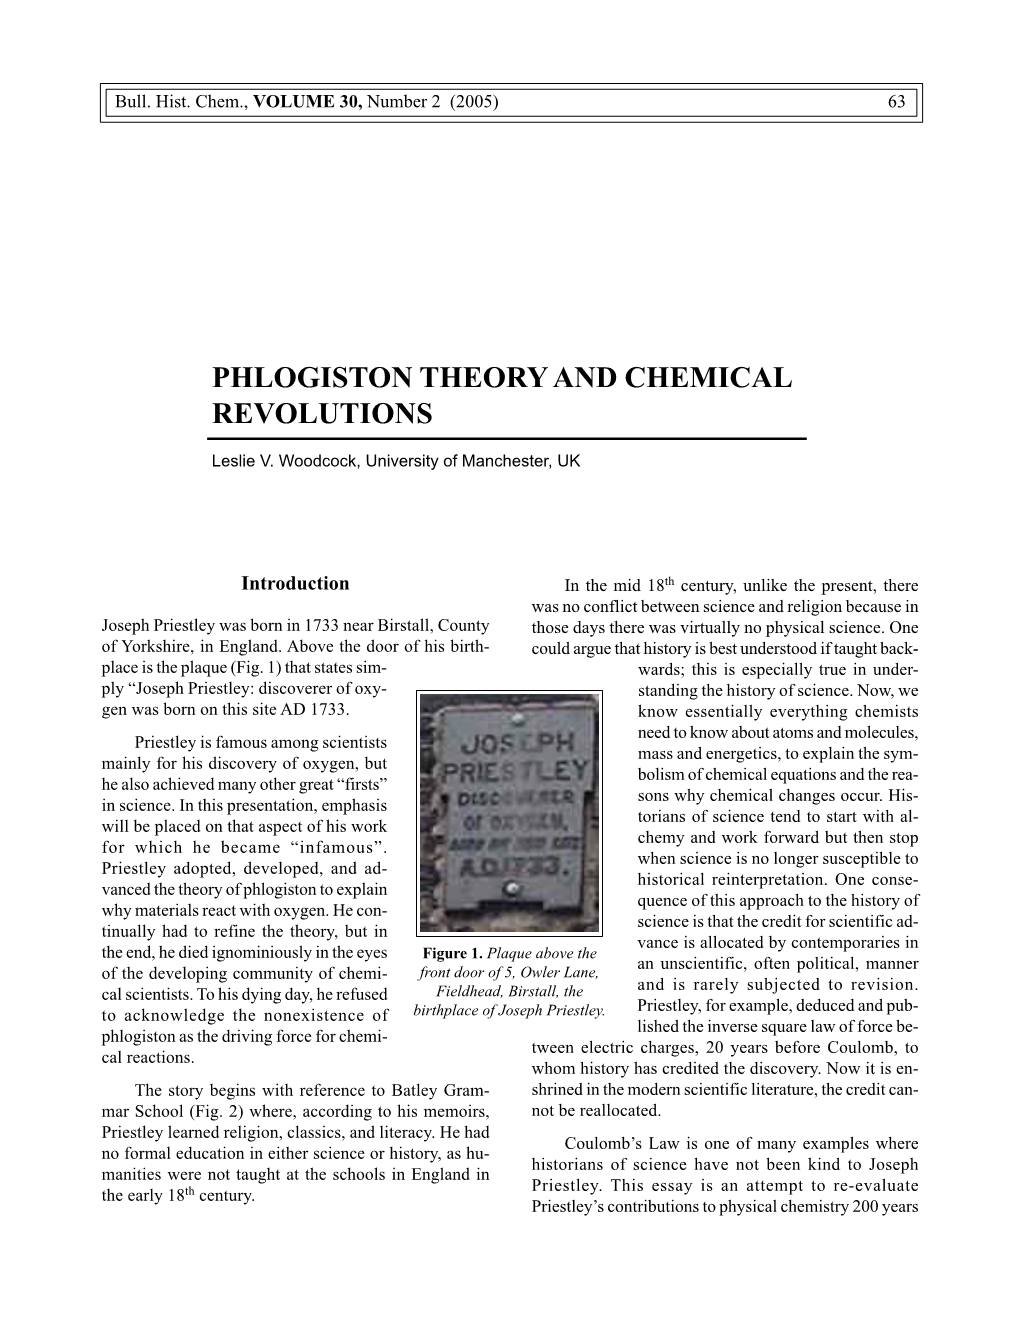 Phlogiston Theory and Chemical Revolutions